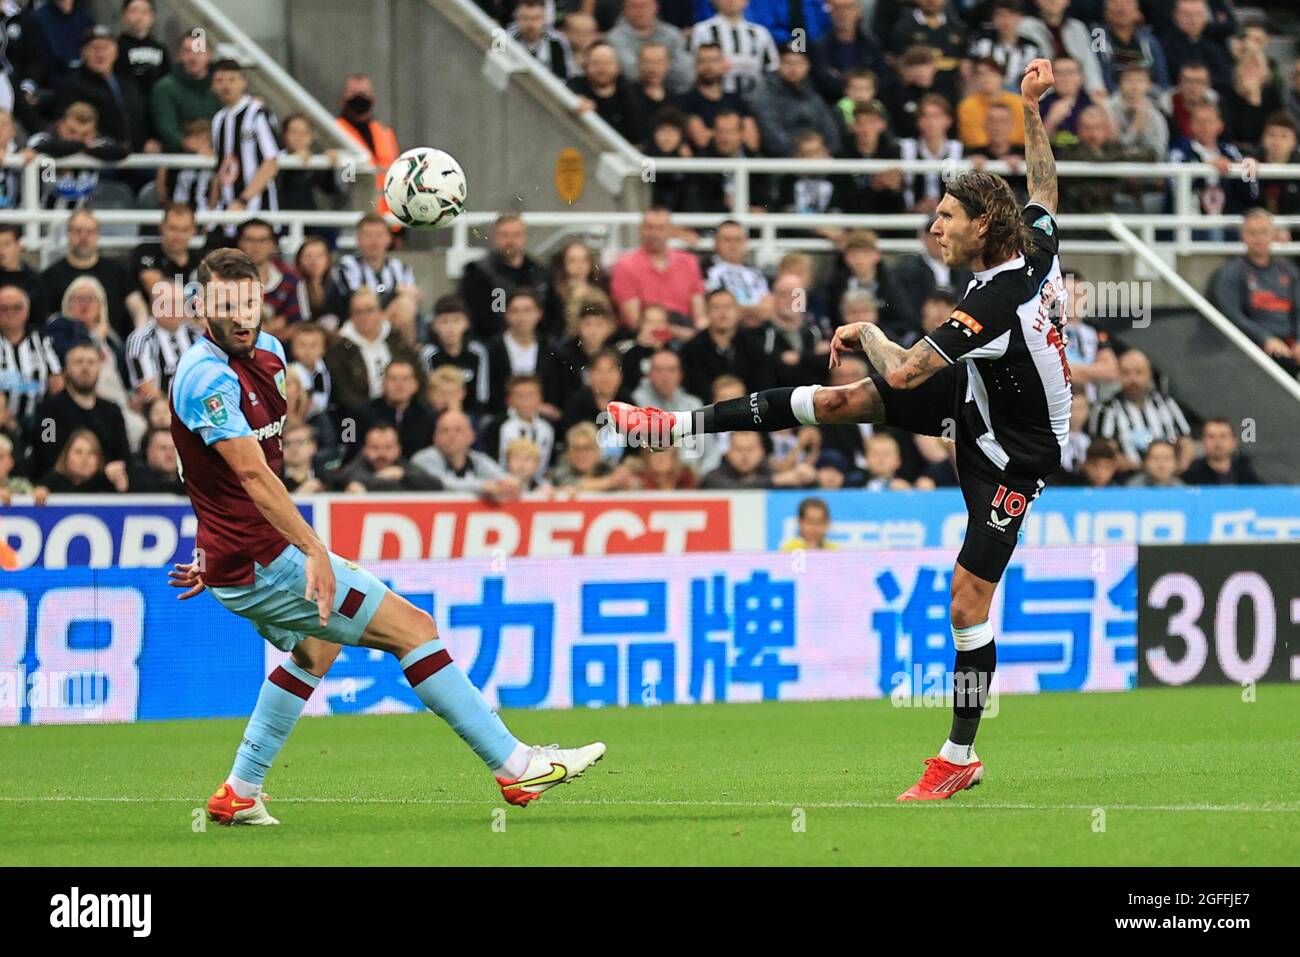 Newcastle, UK. 25th Aug, 2021. Jeff Hendrick #16 of Newcastle United shoots on goal in Newcastle, United Kingdom on 8/25/2021. (Photo by Mark Cosgrove/News Images/Sipa USA) Credit: Sipa USA/Alamy Live News Stock Photo